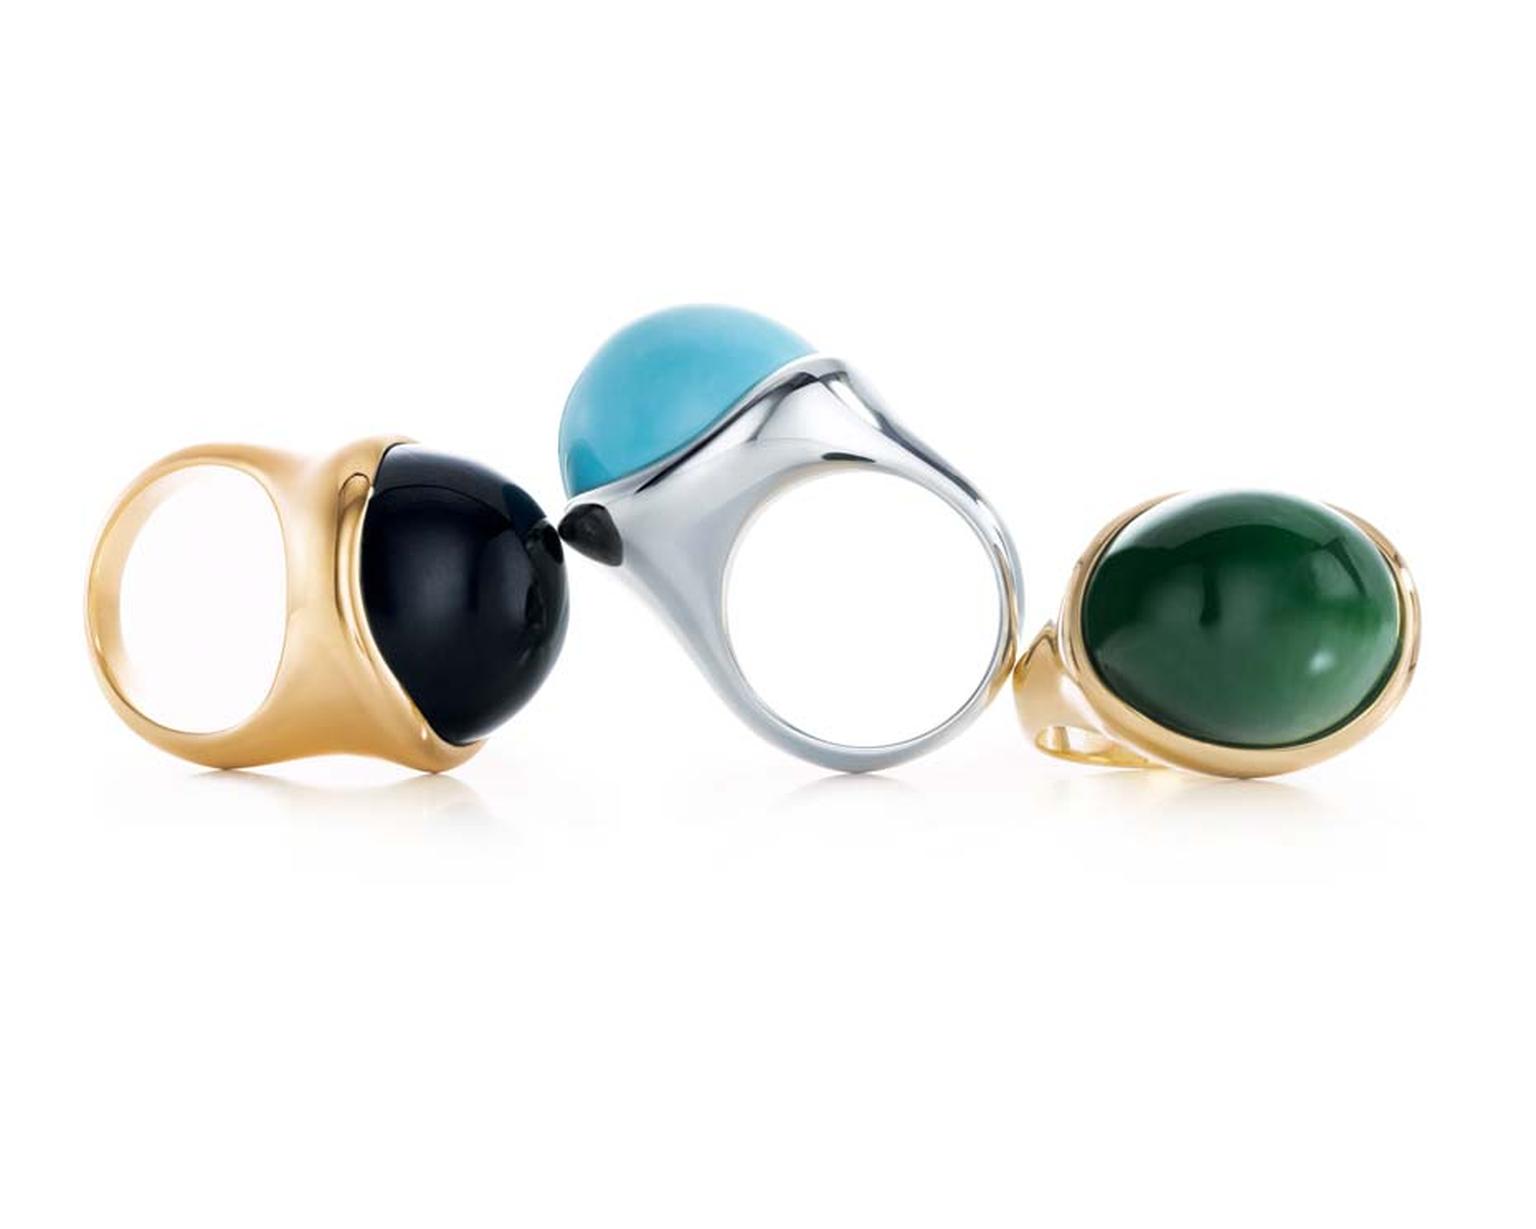 Elsa Peretti for Tiffany Cabochon rings in gold and silver set with hand-carved black jade, turquoise and green jade.